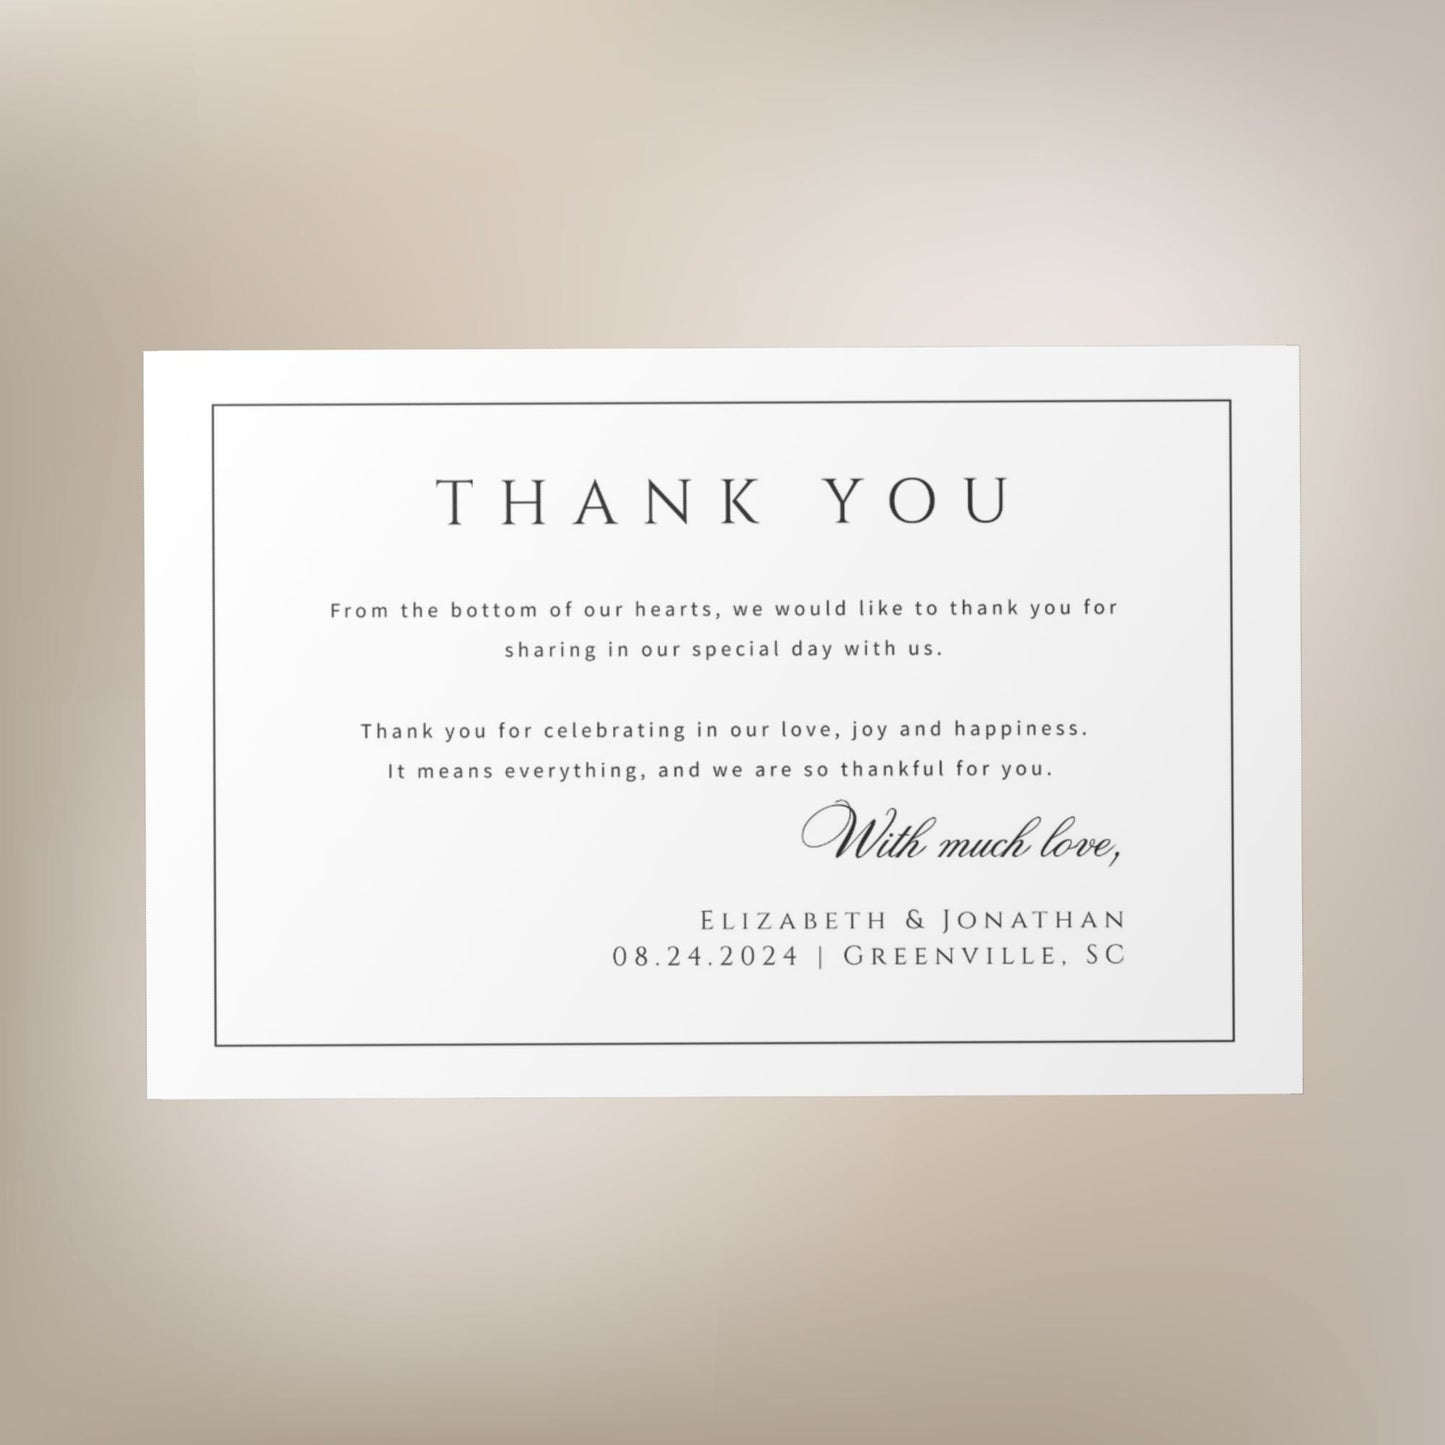 Wedding Thank You Card Template, Thank You Wedding Cards, Wedding Card Thank You, Wedding Stationery, Double Sided, Edit with Templett, TRA